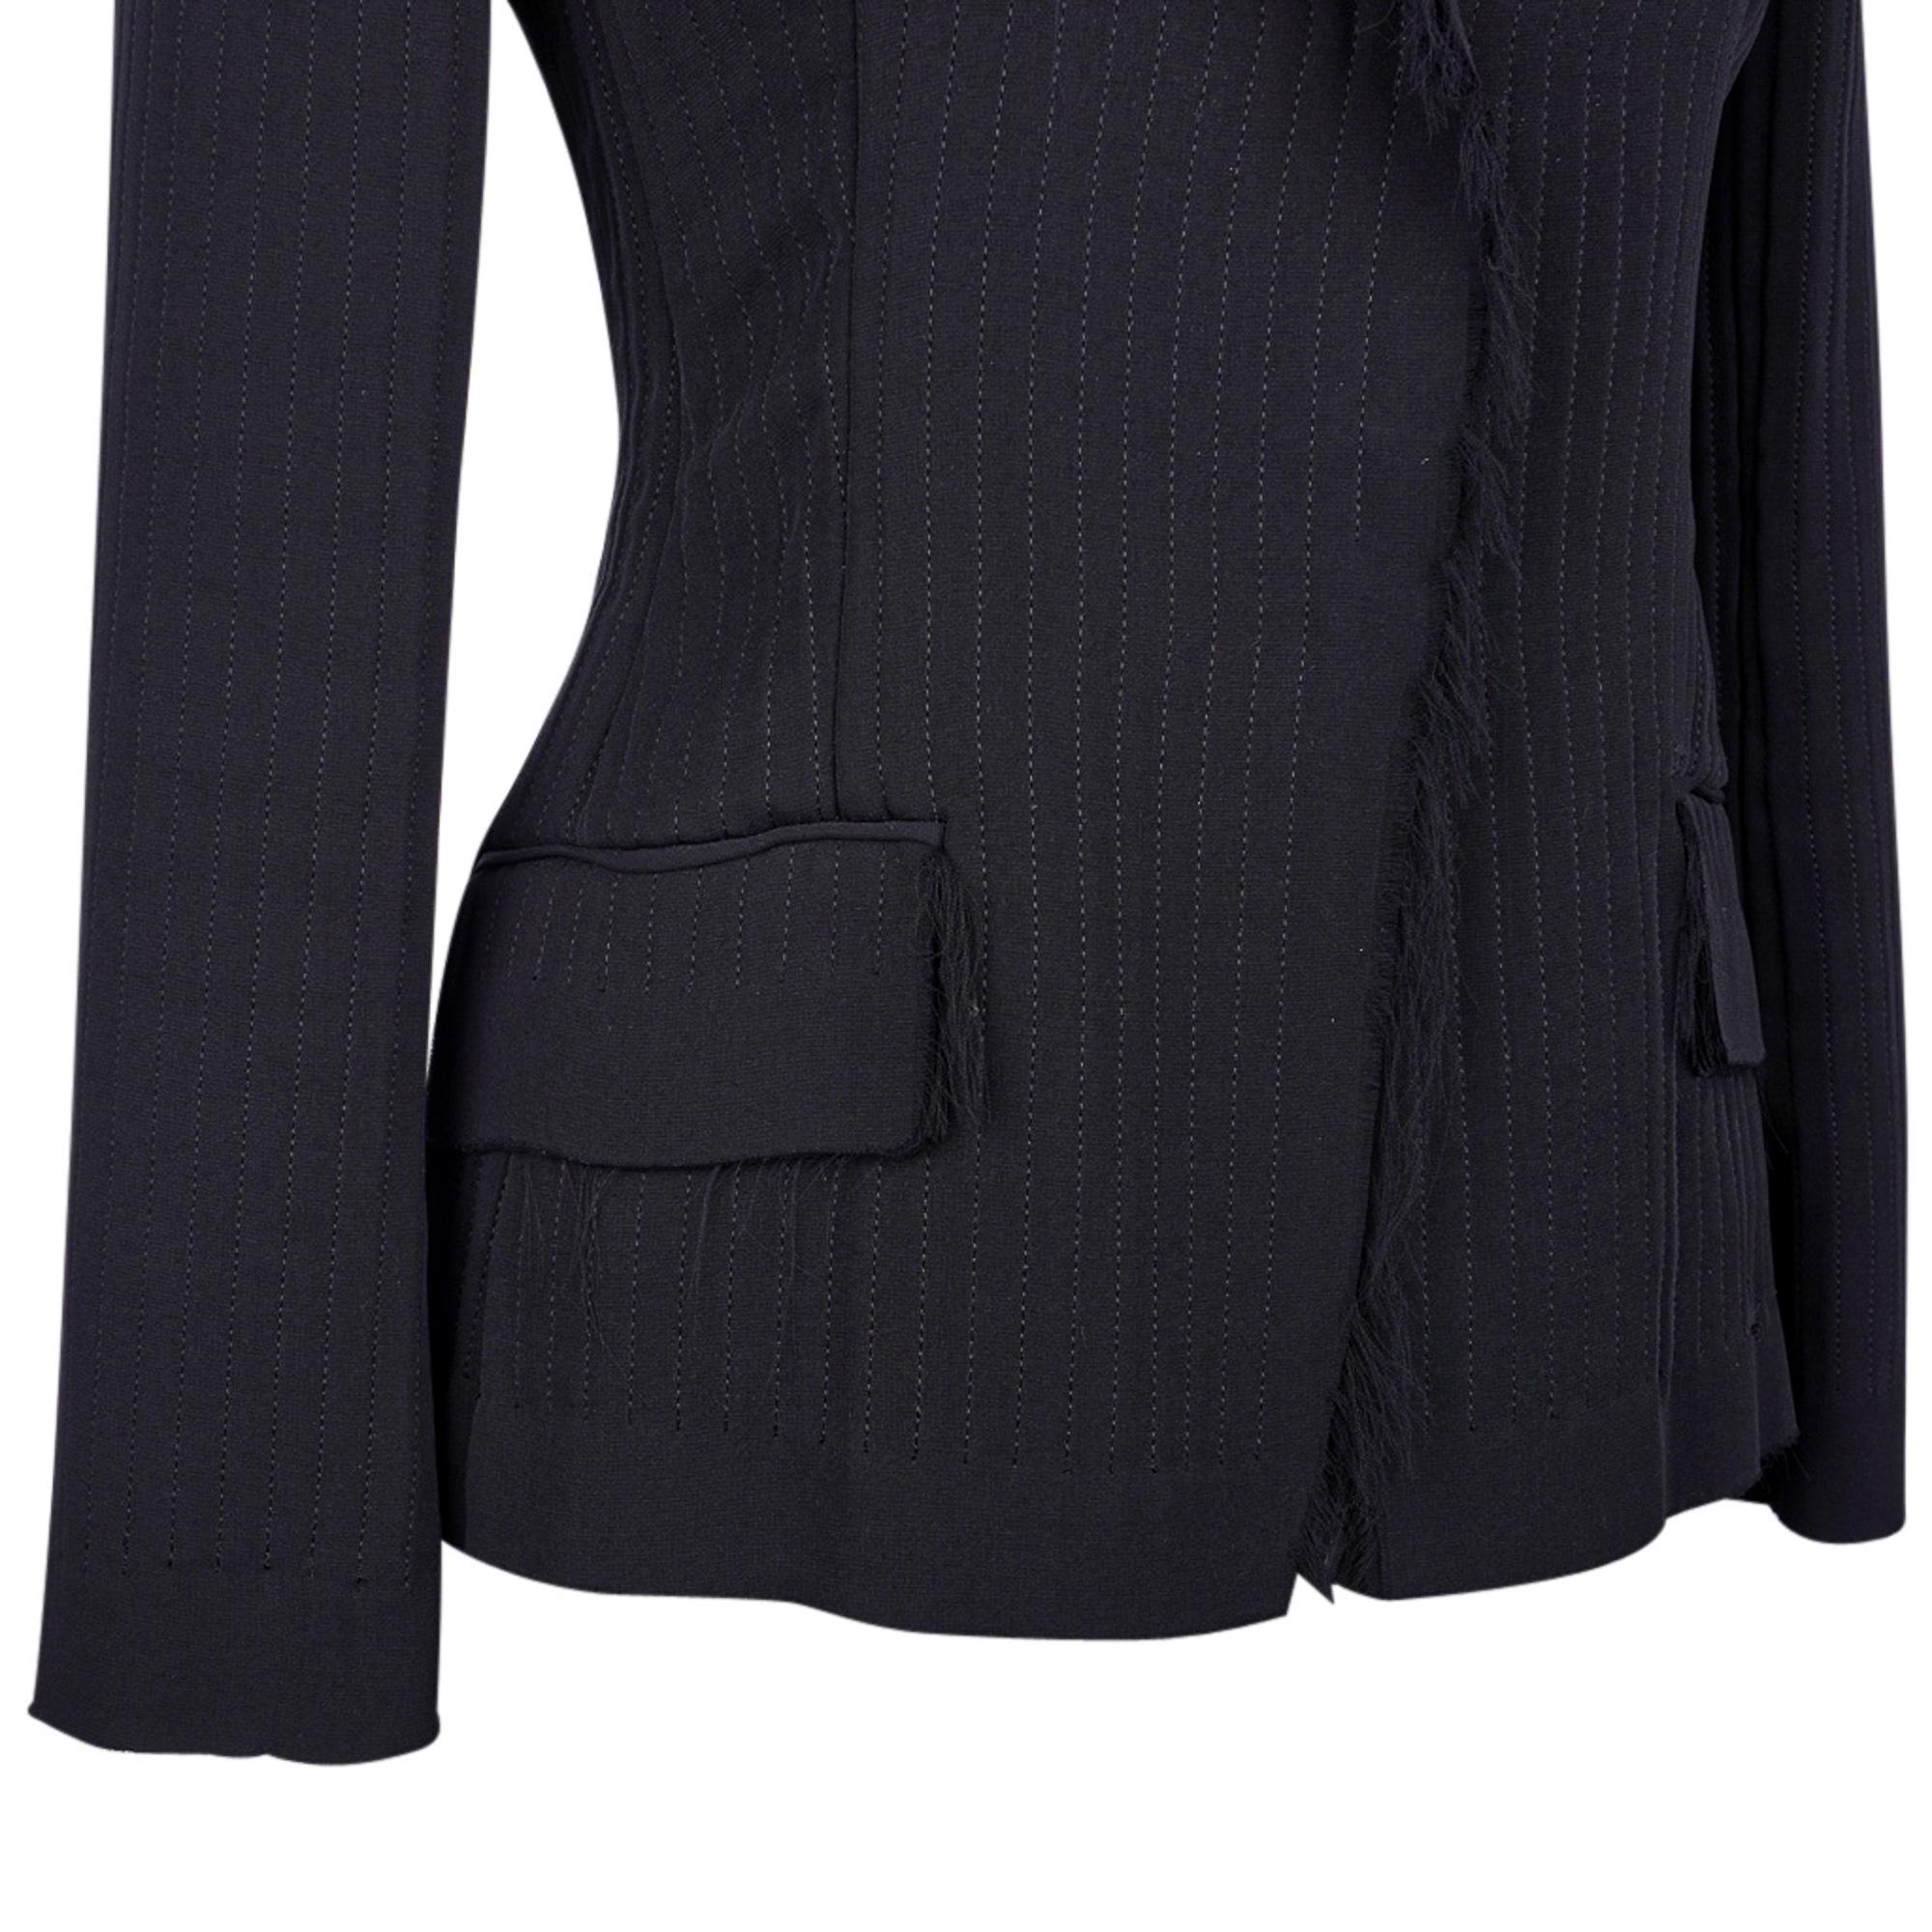 Yves Saint Laurent Jacket Exquisite Tom Ford Creation in Layers 36 1